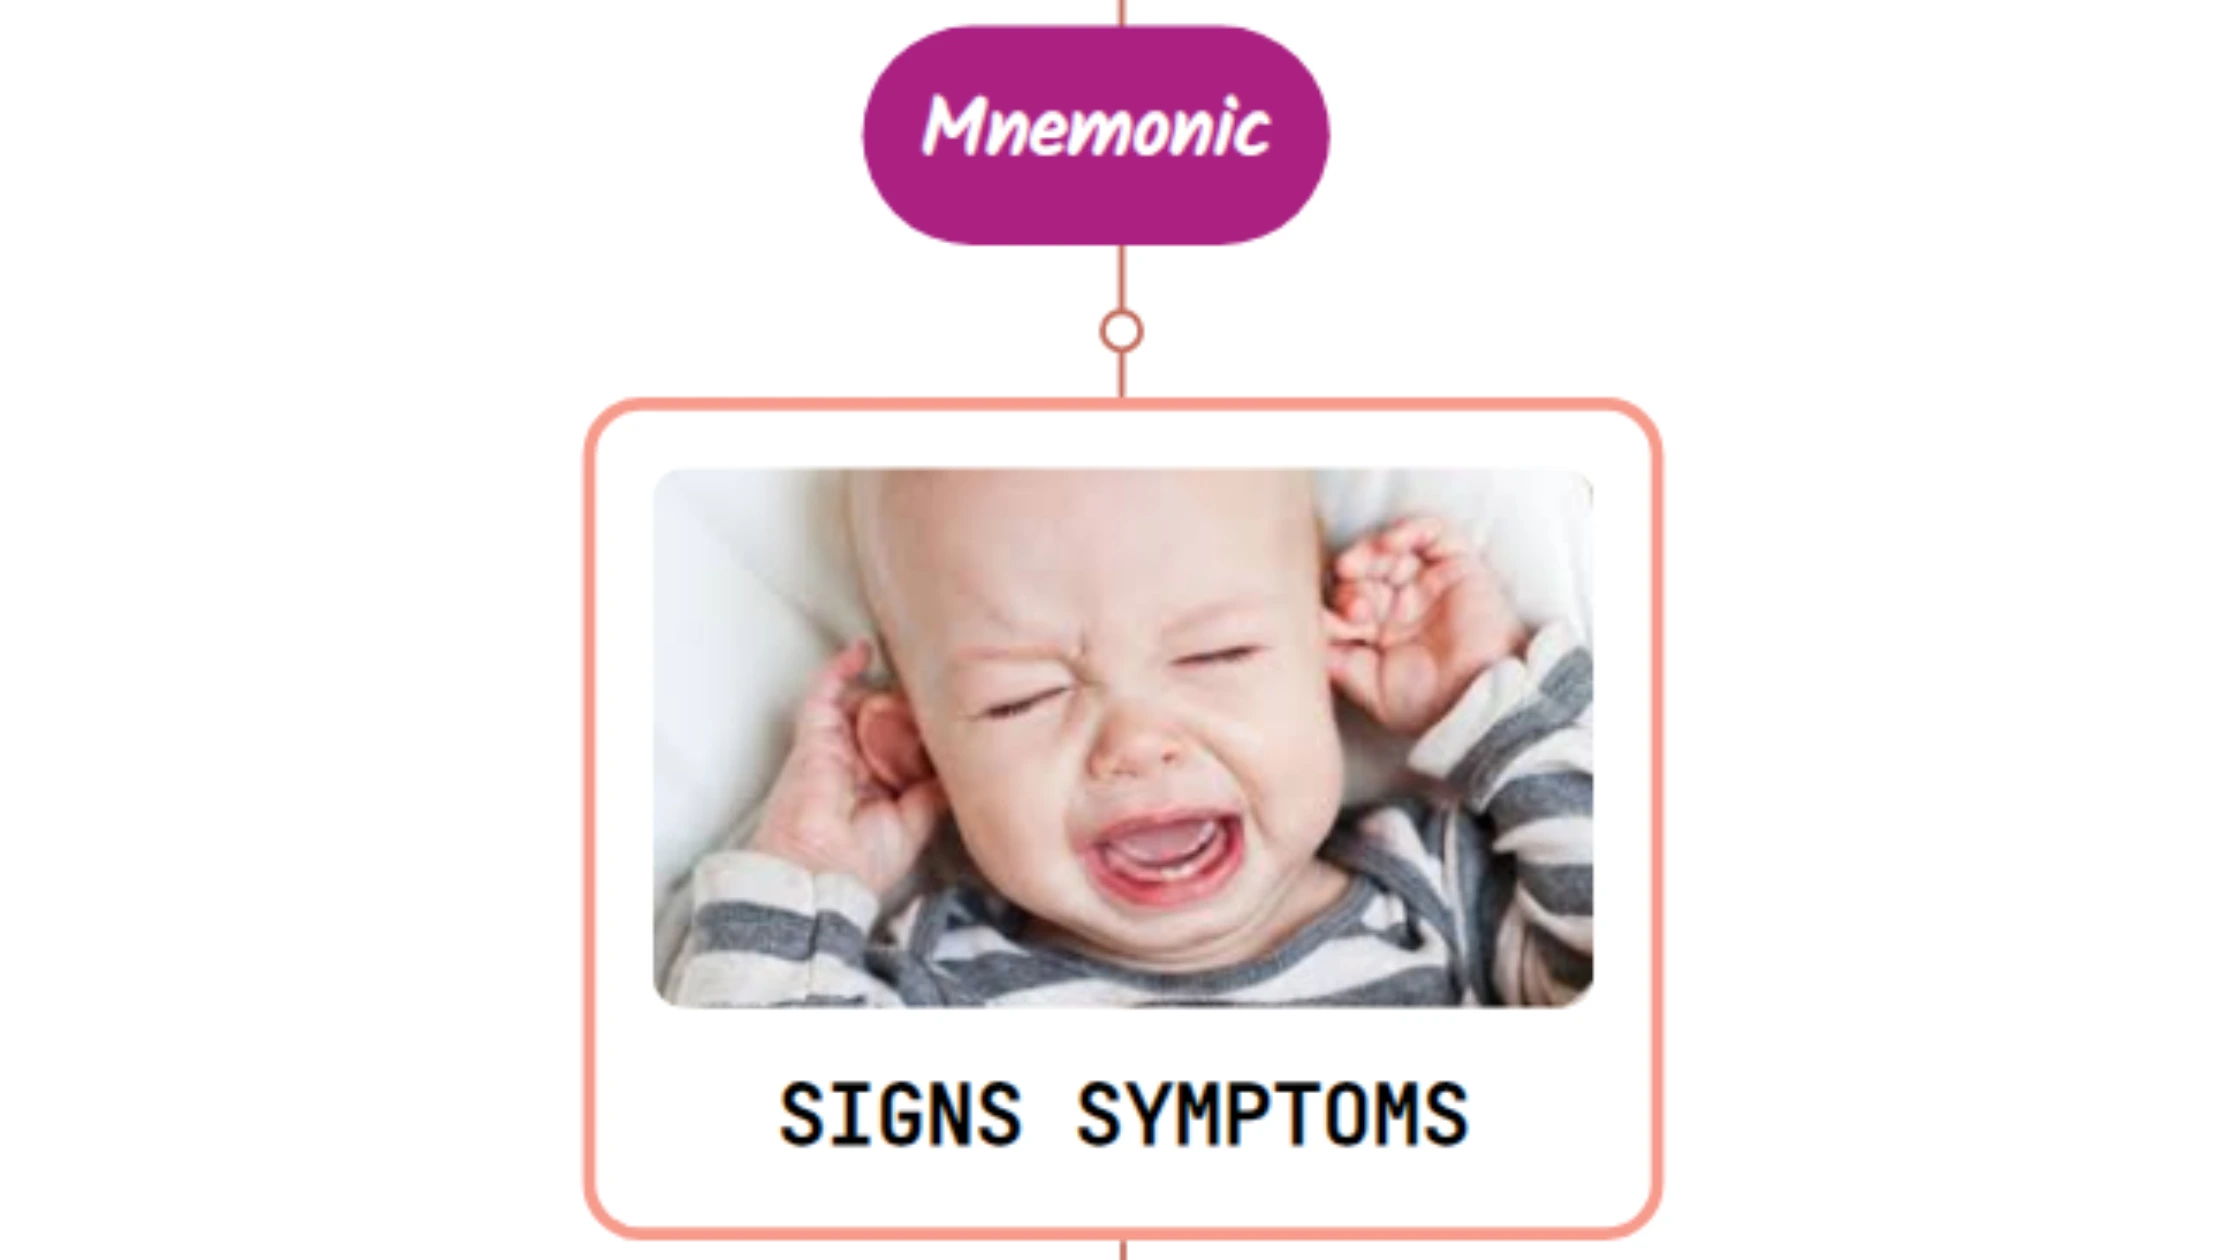 You are currently viewing Acute Otitis Media Signs & Symptoms – Mnemonic